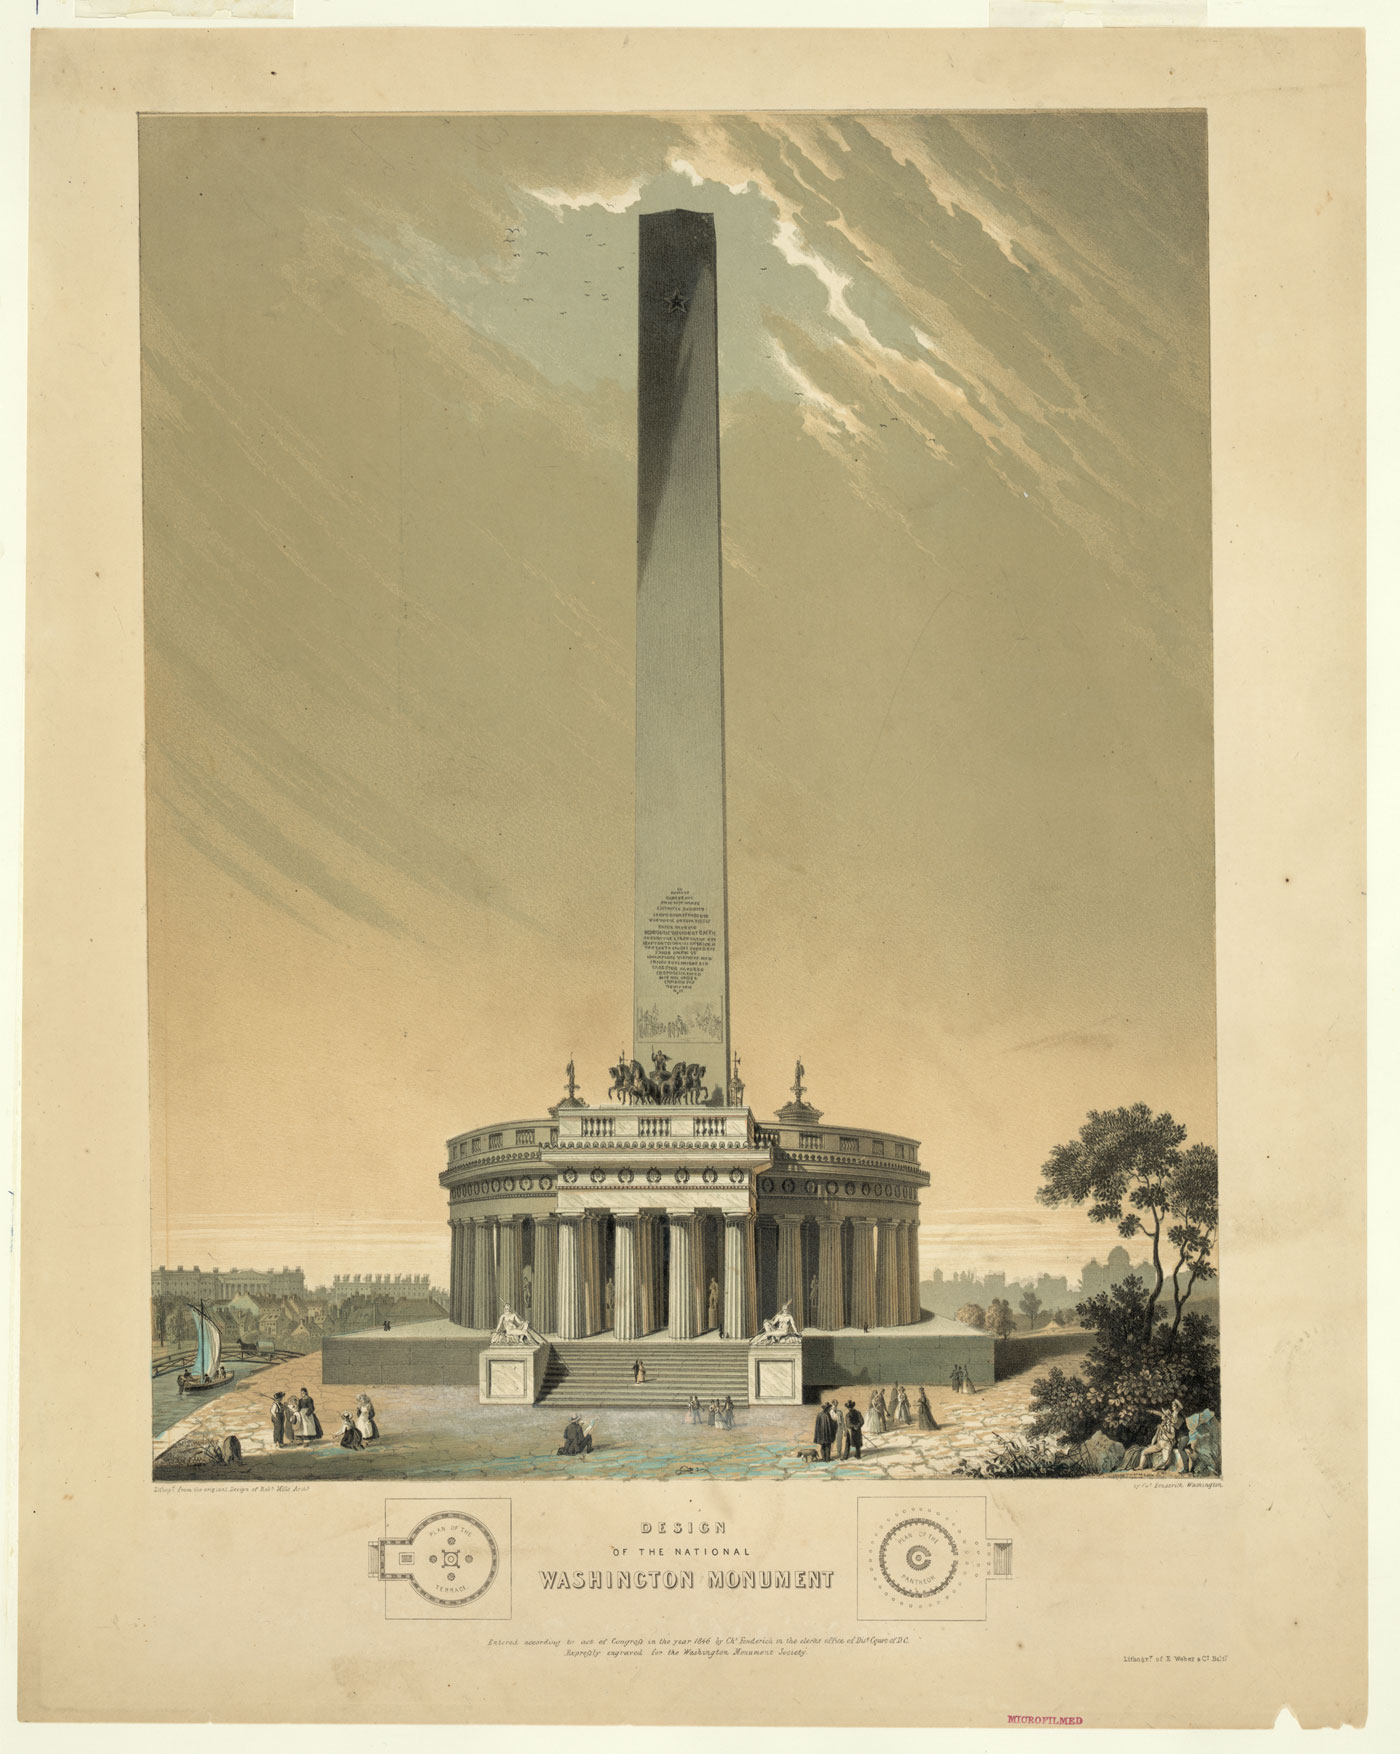 Winning Competition Entry for the Washington Monument by Robert Mills, 1846. Mills’s original proposal called for an obelisk anchored by a circular, Greek-inspired temple at the base. The base was never executed, and the proportions of the obelisk itself were changed when the structure was finally completed nearly four decades after this drawing was produced. Library of Congress, Prints & Photographs Division, LC-DIG-pga-03714.